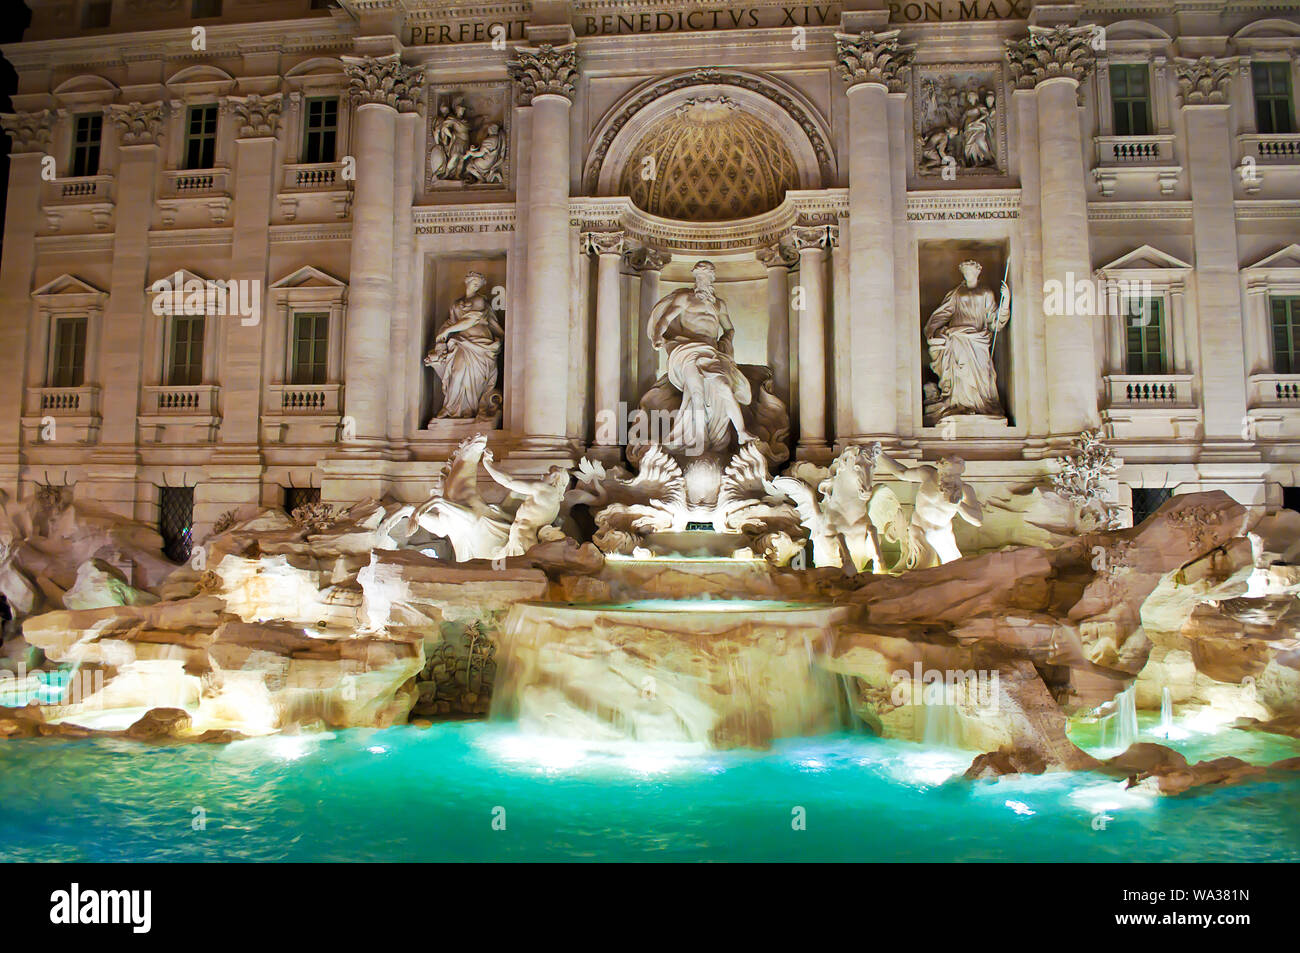 View of the illuminated Fontana di Trevi and green flowing waters at night. Many intricate statues and marble columns Stock Photo